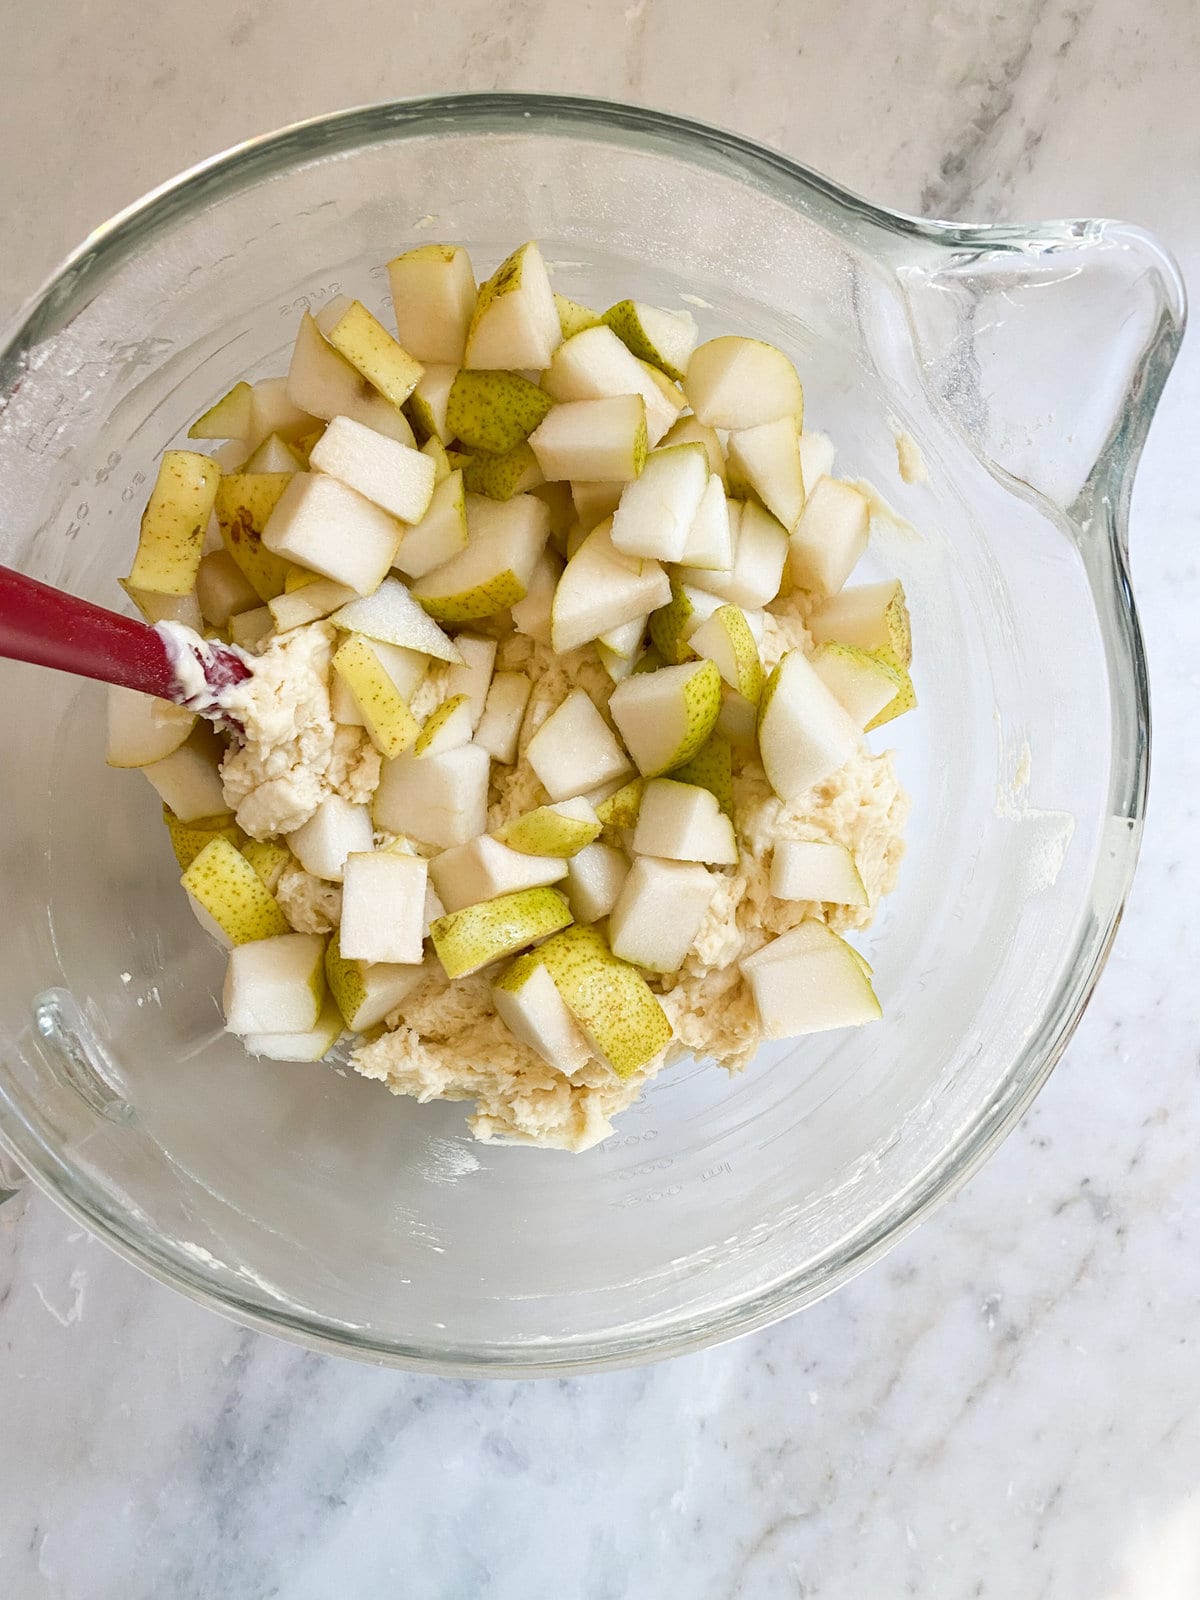 mixing the pear cake batter with the fresh pears until combined.